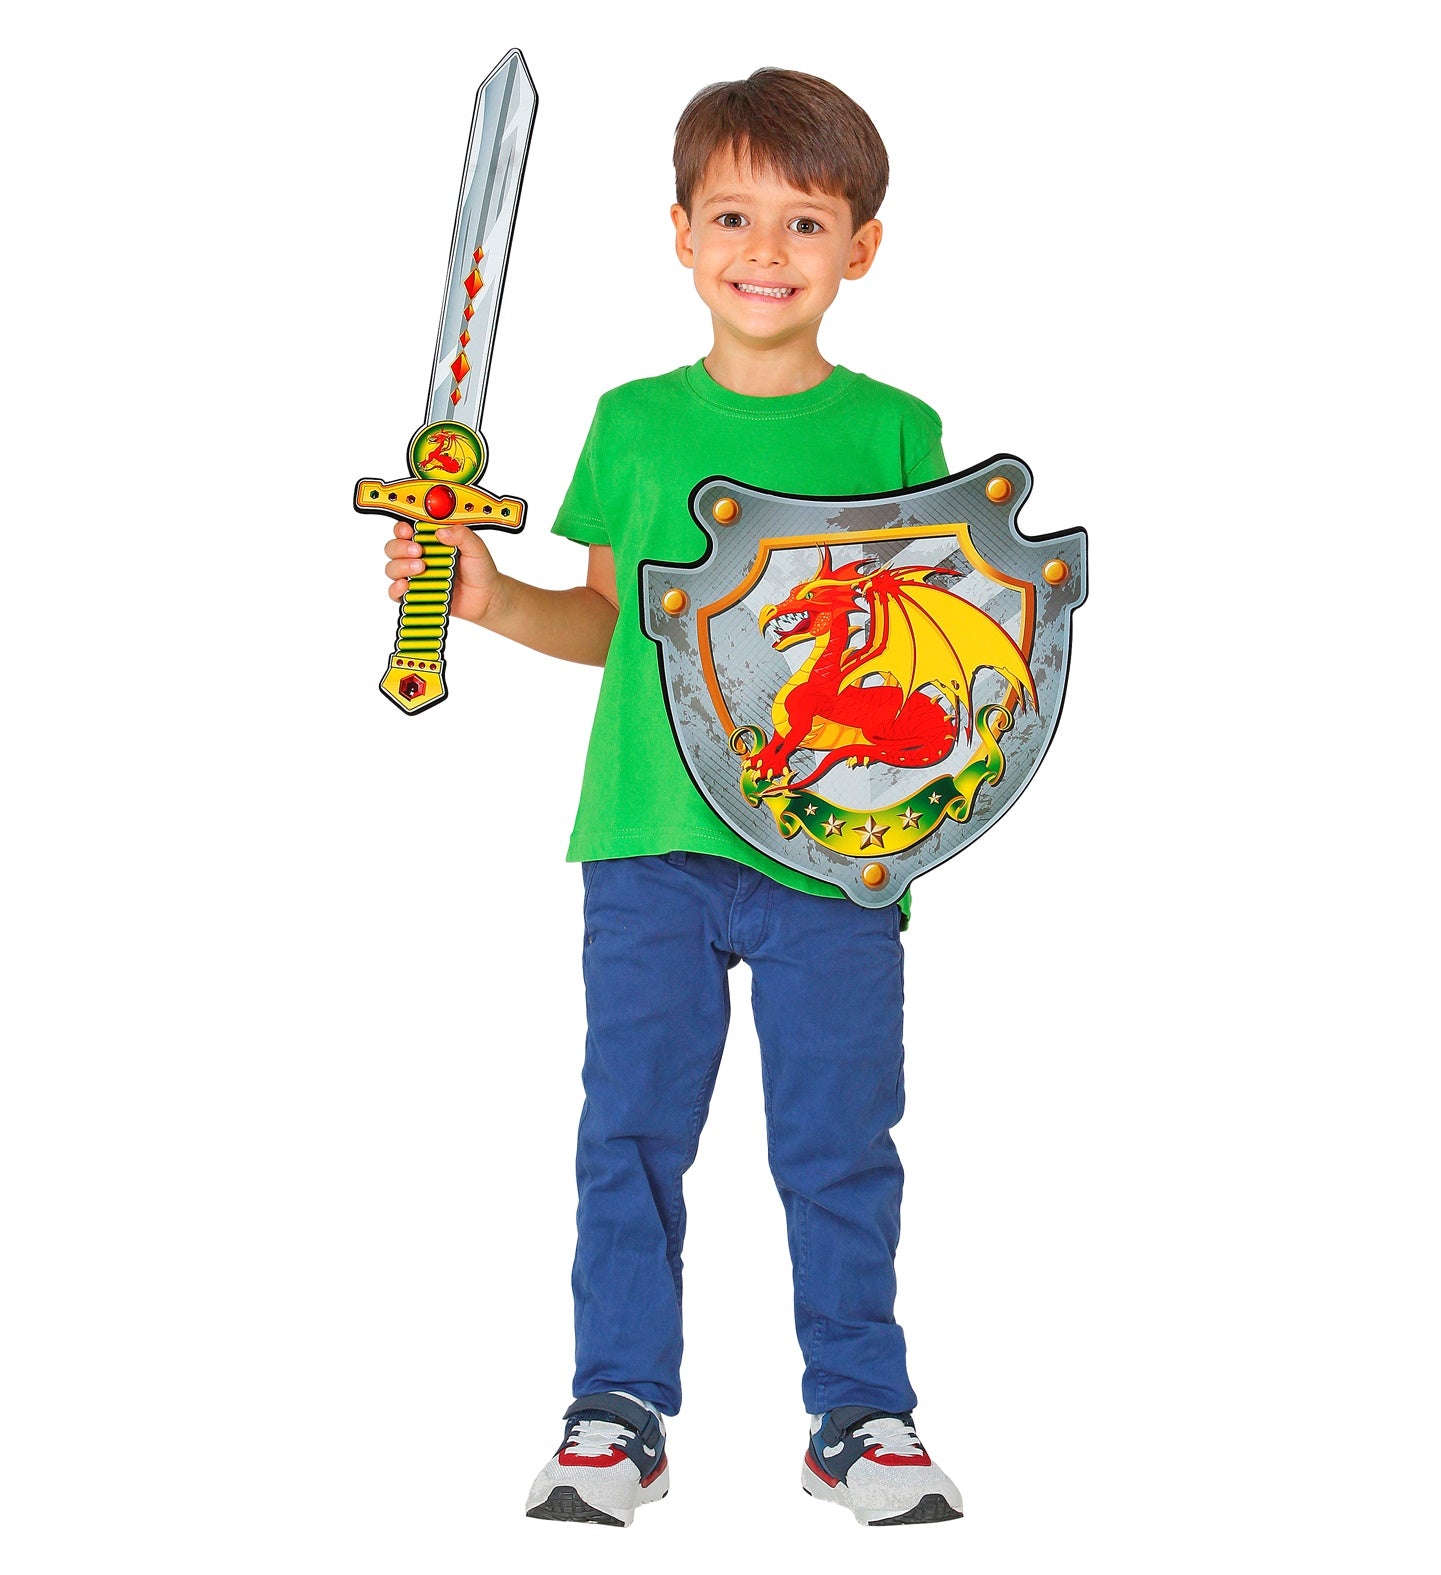 Dragon Knight Shield and Sword Set Children's toy's